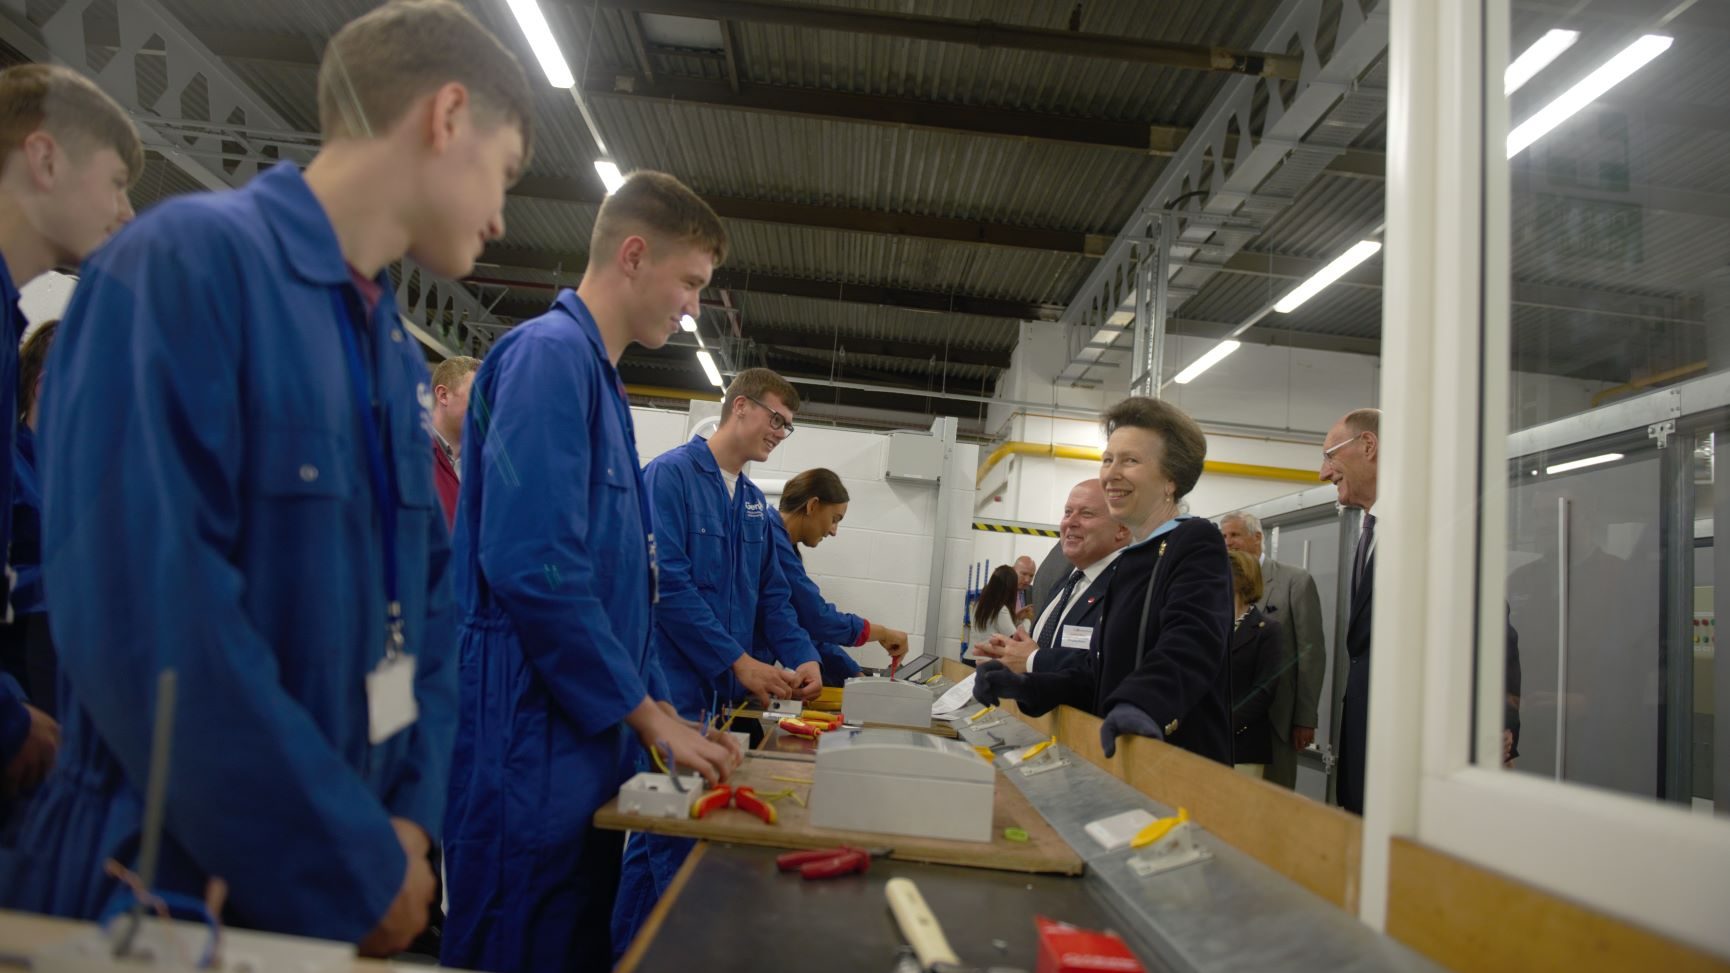 HRH The Princess Royal meeting with Gen2 apprentices